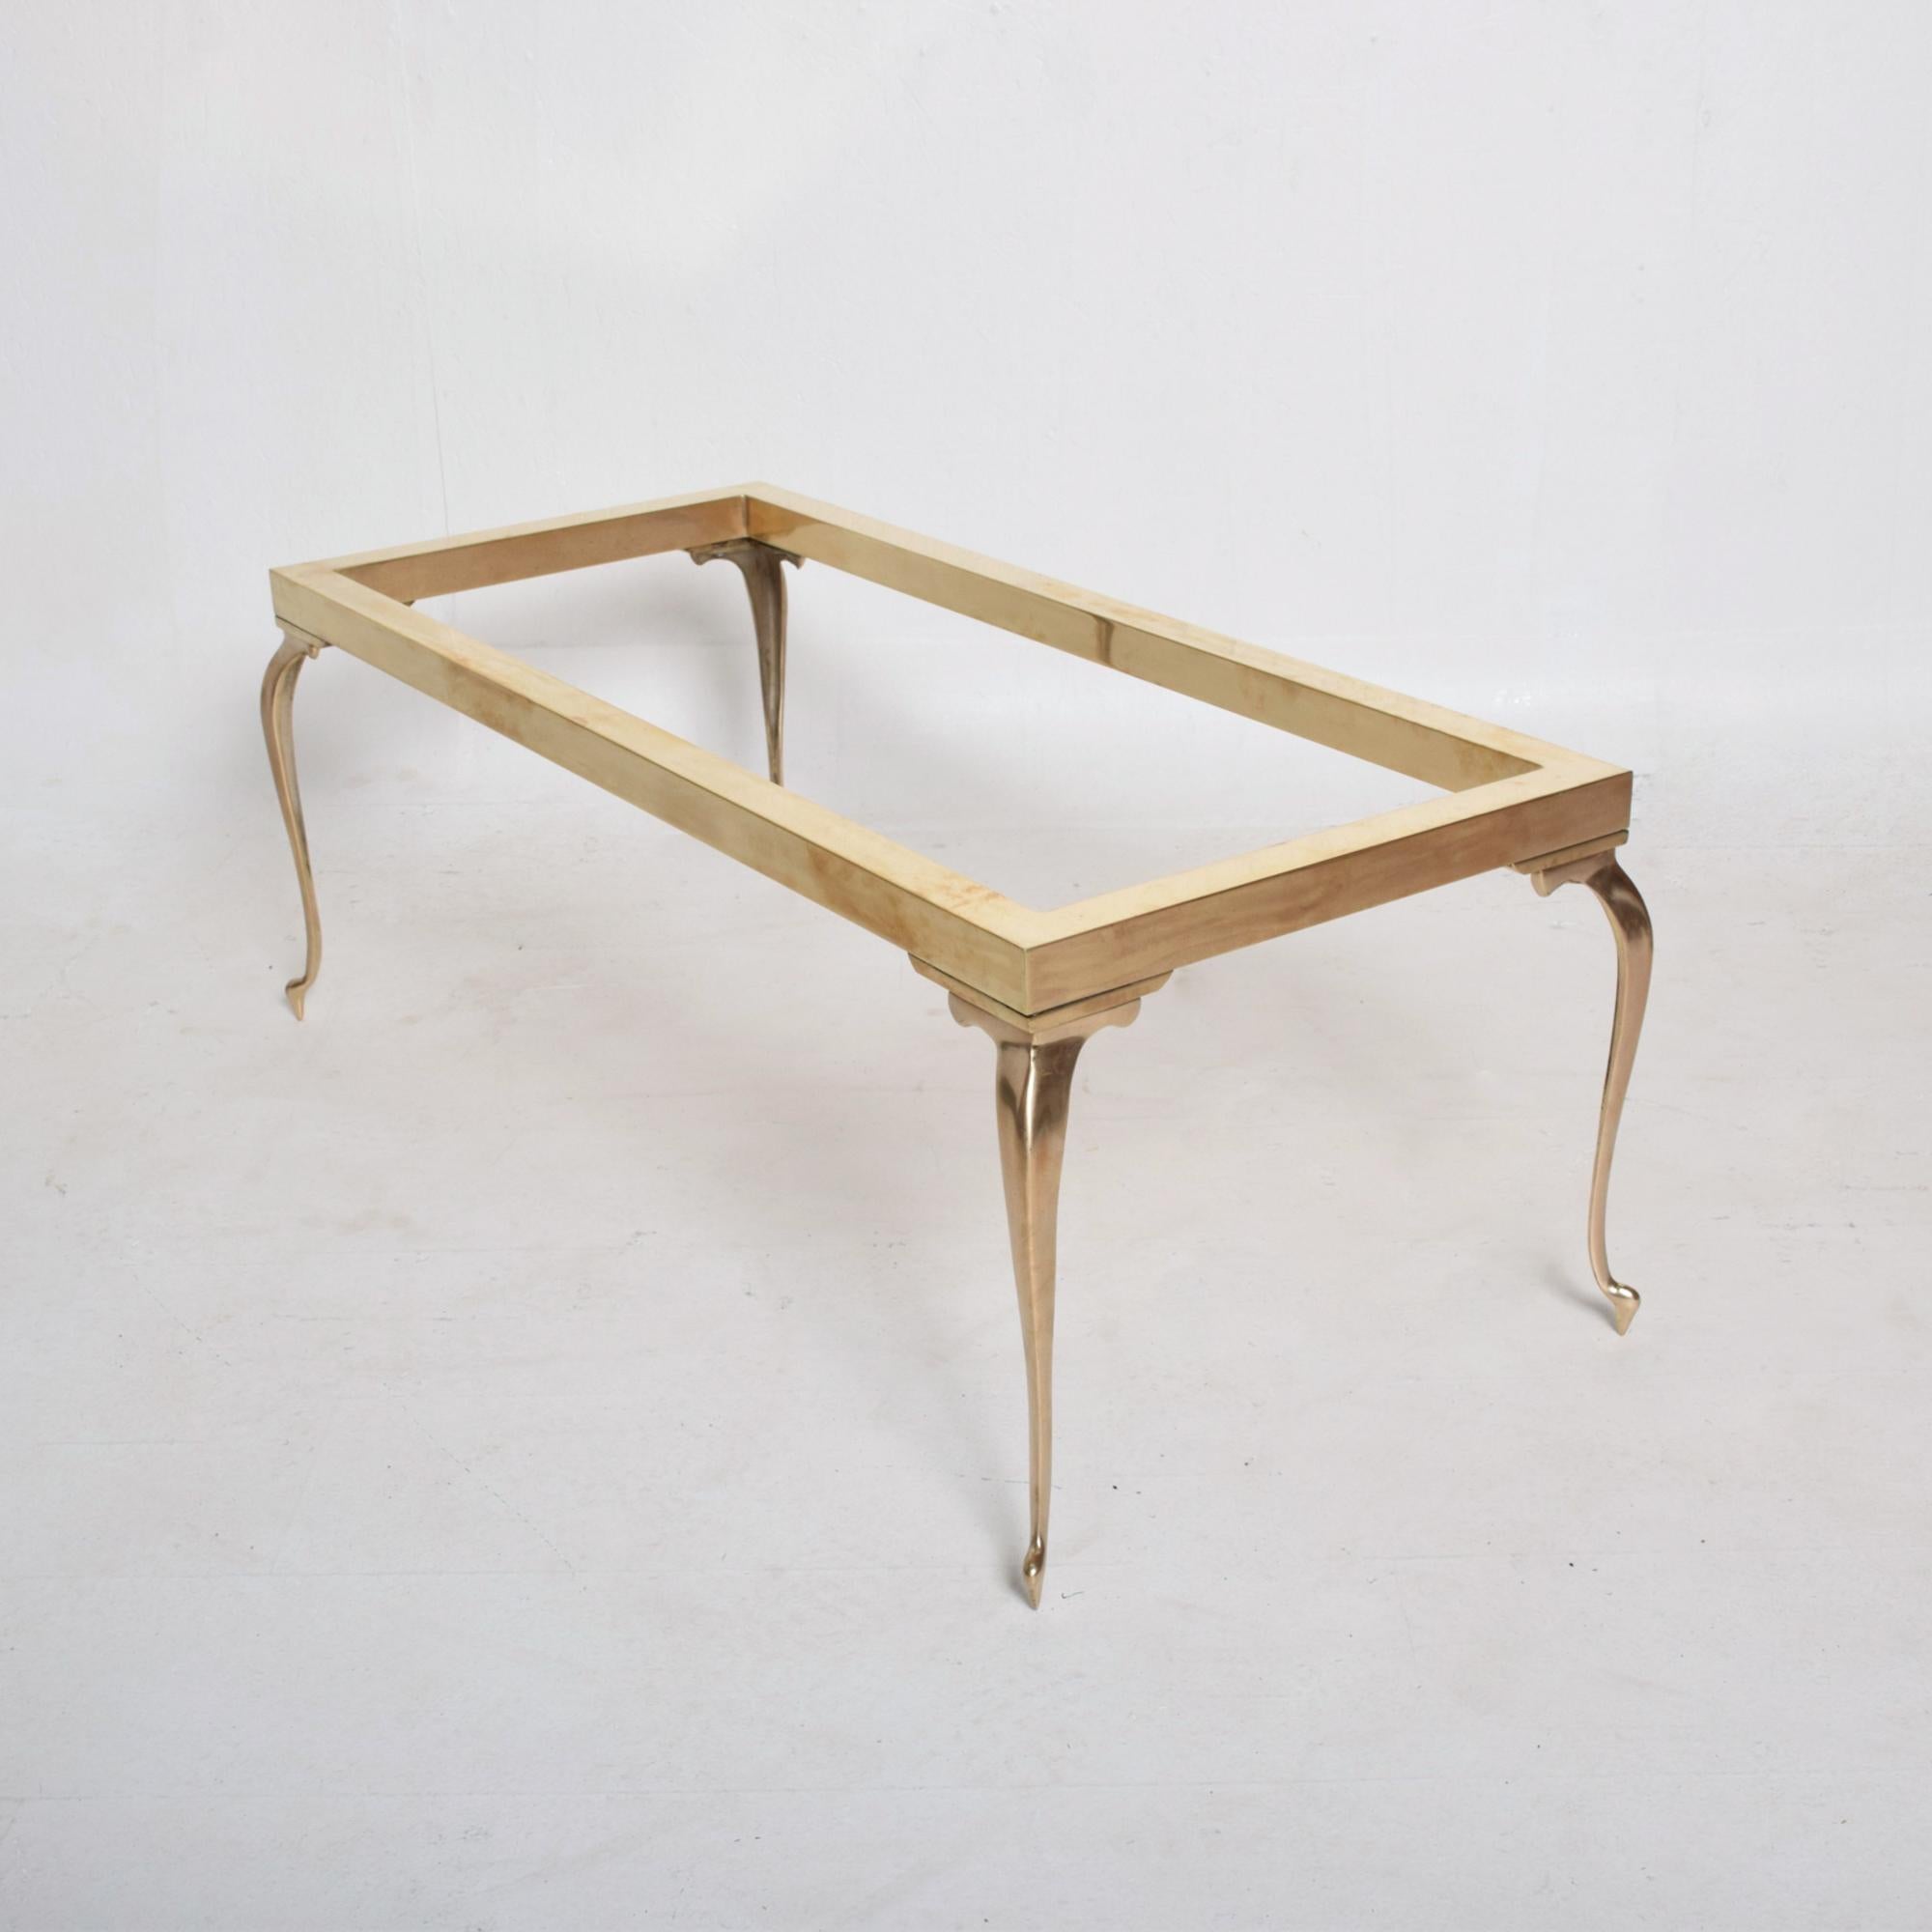 American Modern Regency Brass Coffee Table with Cabriole Legs Style of Mastercraft 1970s